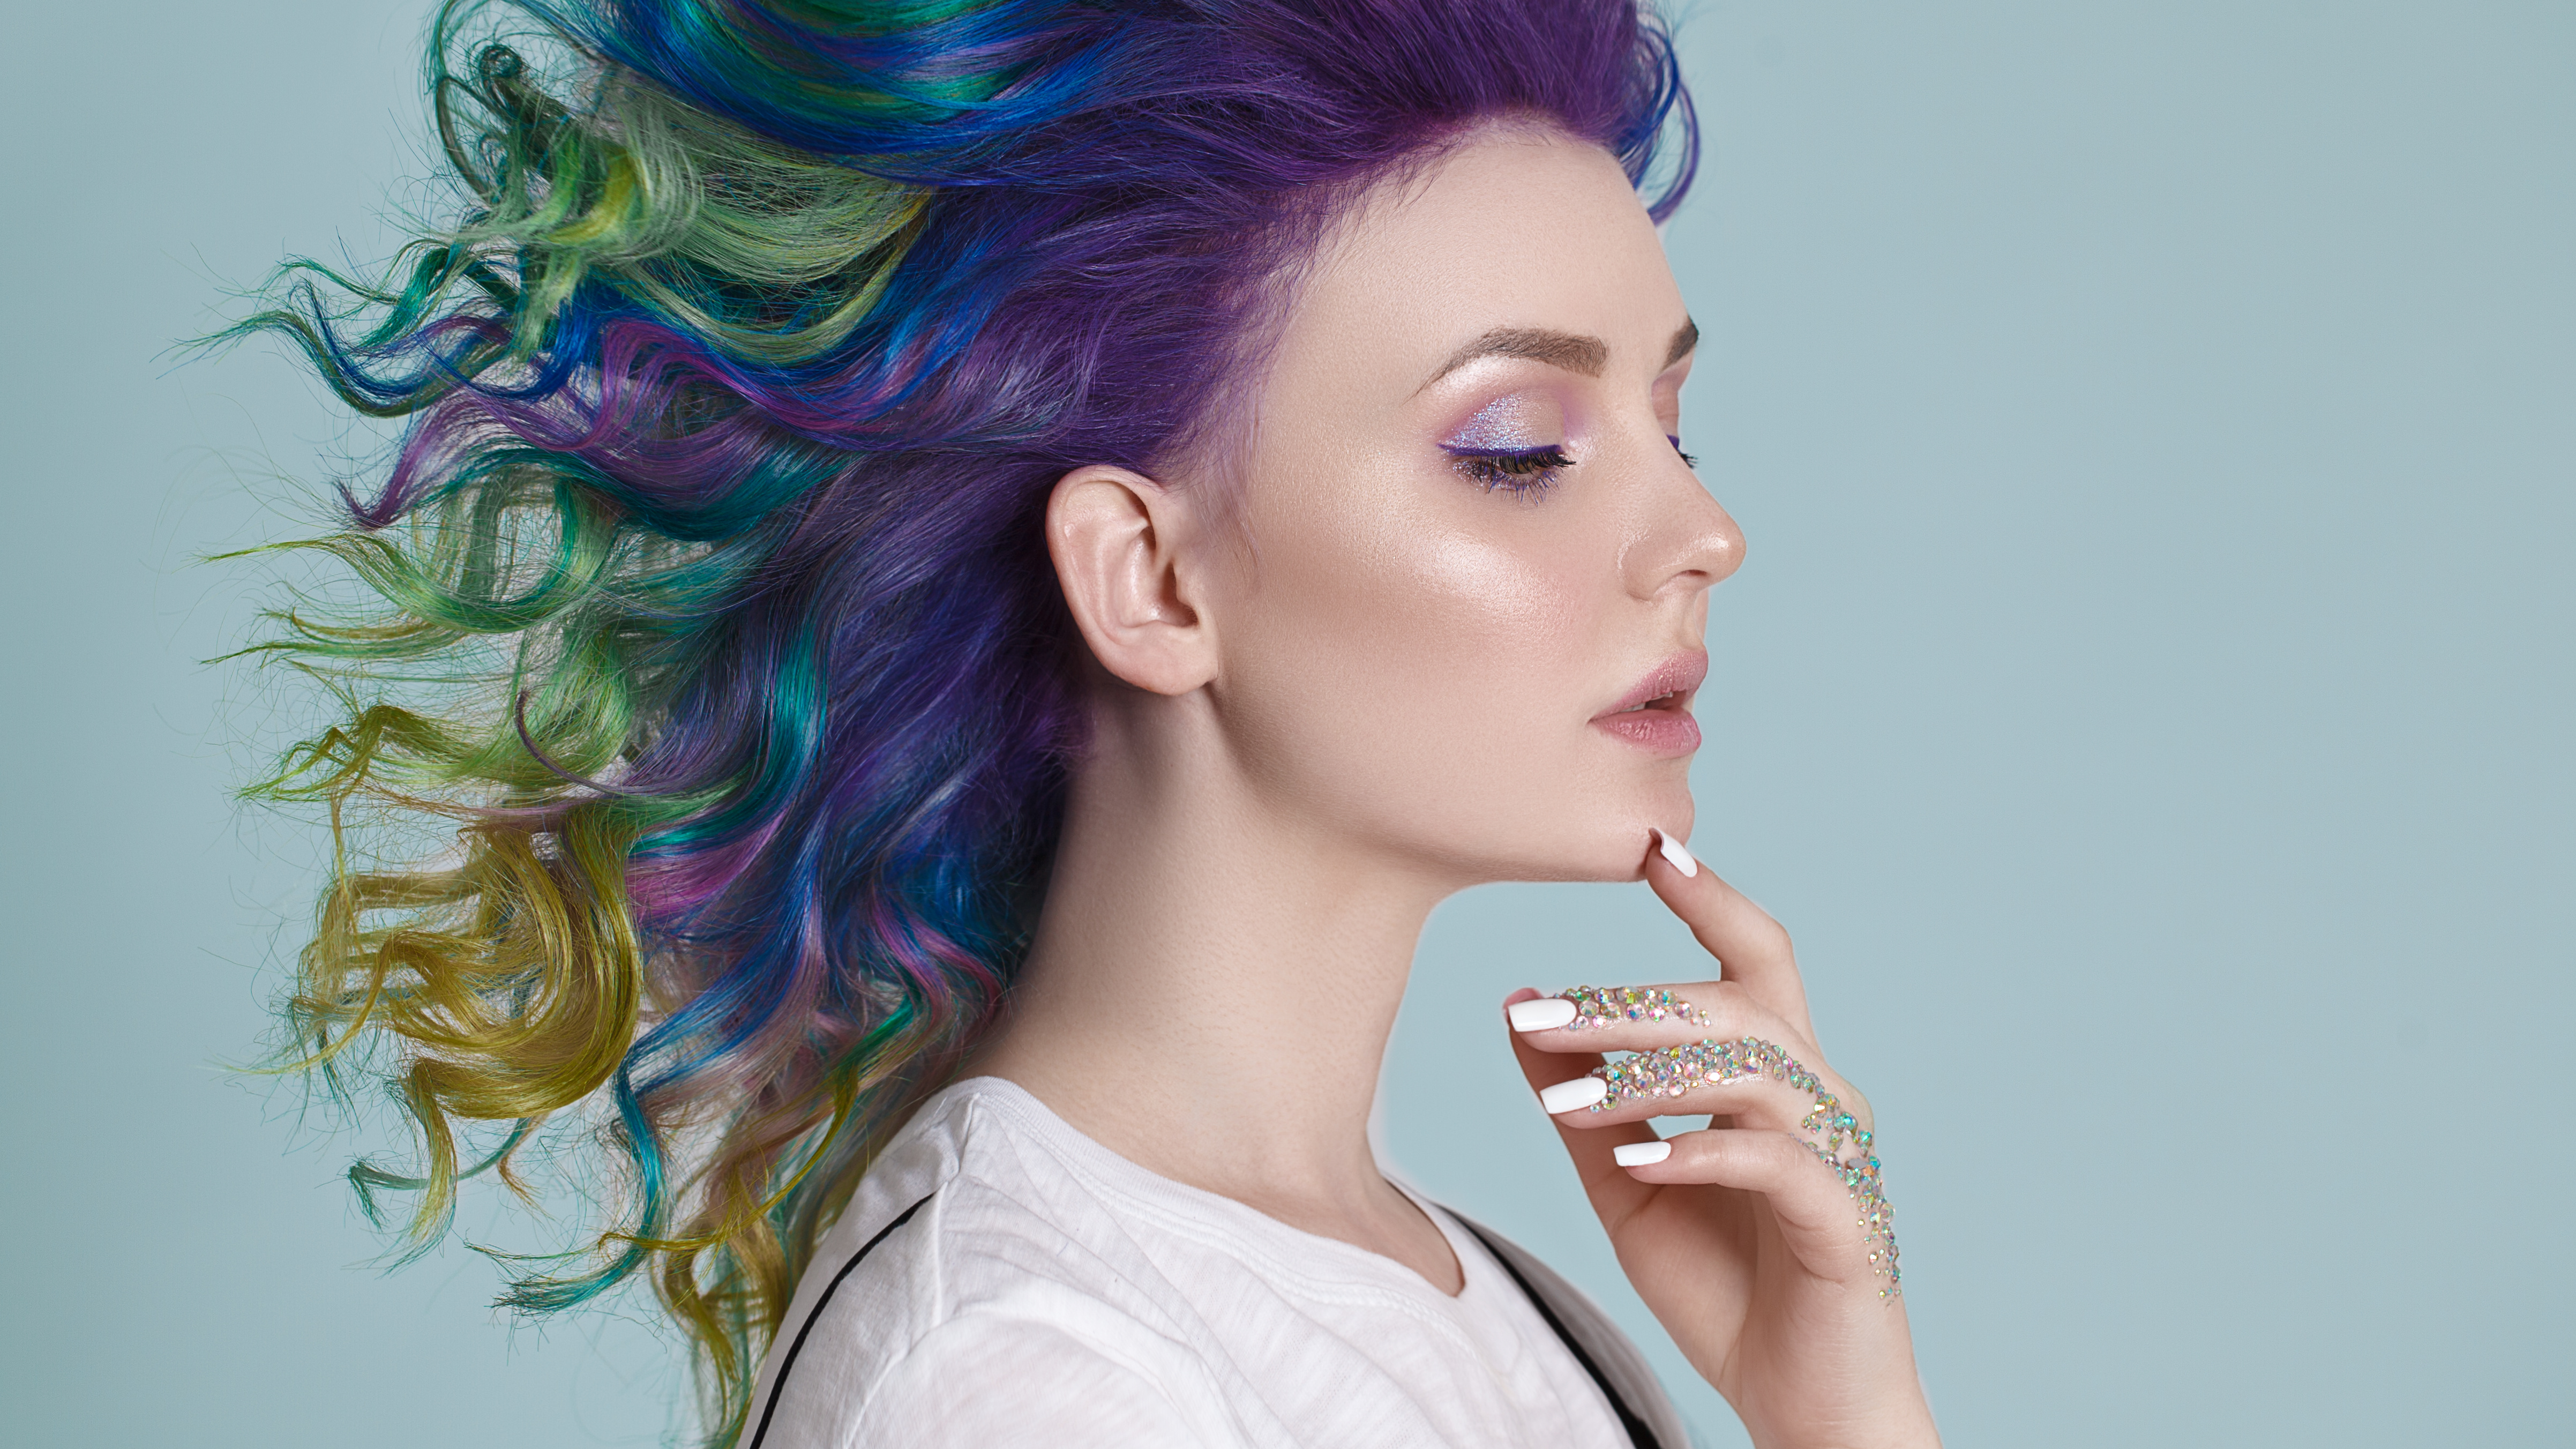 Colored hairs. Portrait of beautiful women with flying hairs and ...